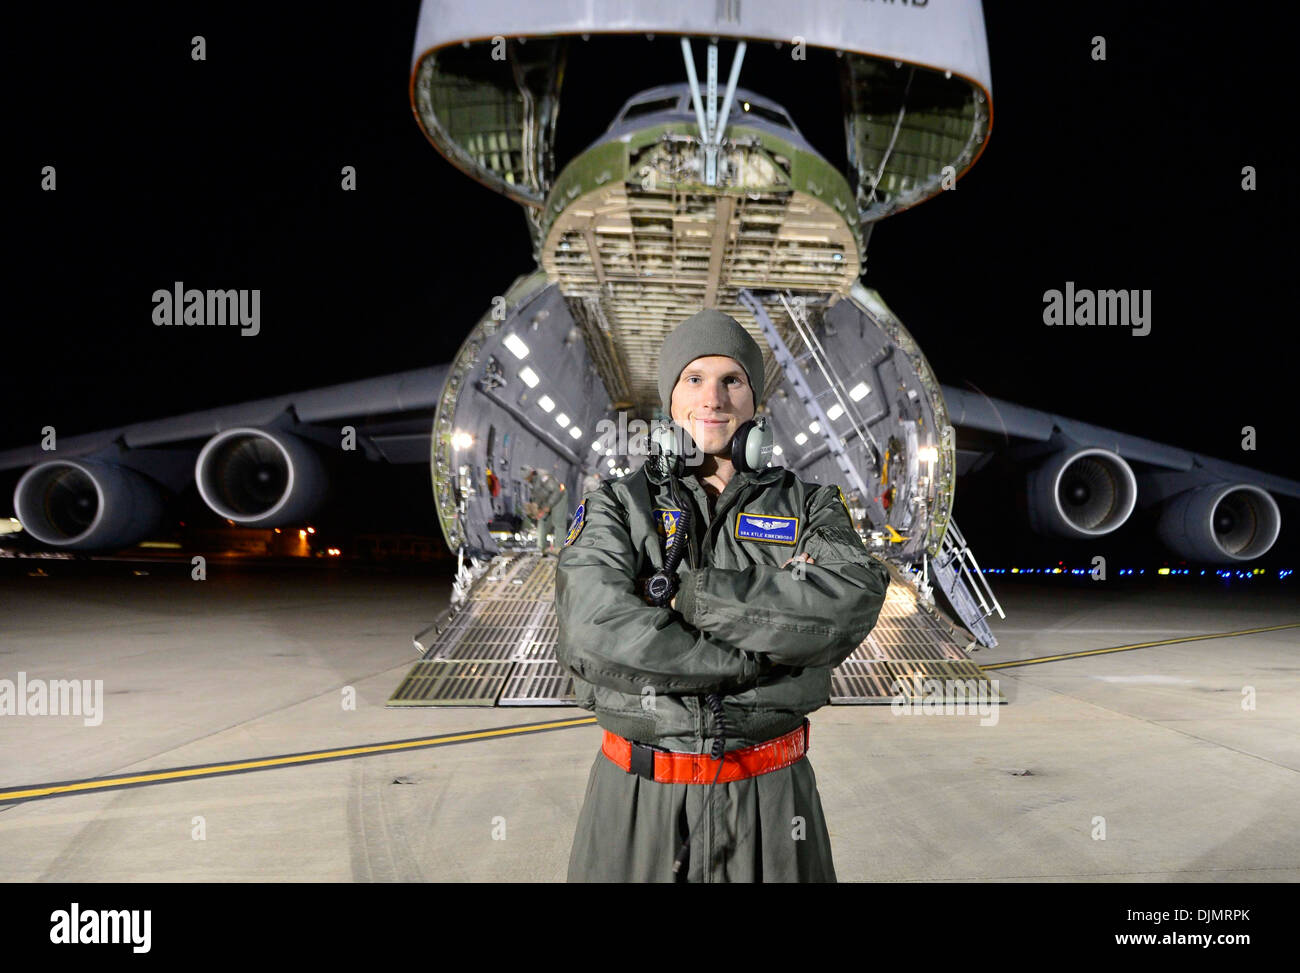 Air Force Reserve Senior Airman Kyle Klinkenborg, 709th Airlift Squadron loadmaster, poses in front of a C-5M Super Galaxy following the load of the Global Precipitation Measurement Satellite’s support equipment Nov. 20, 2013 at Joint Base Andrews, Md. On Stock Photo